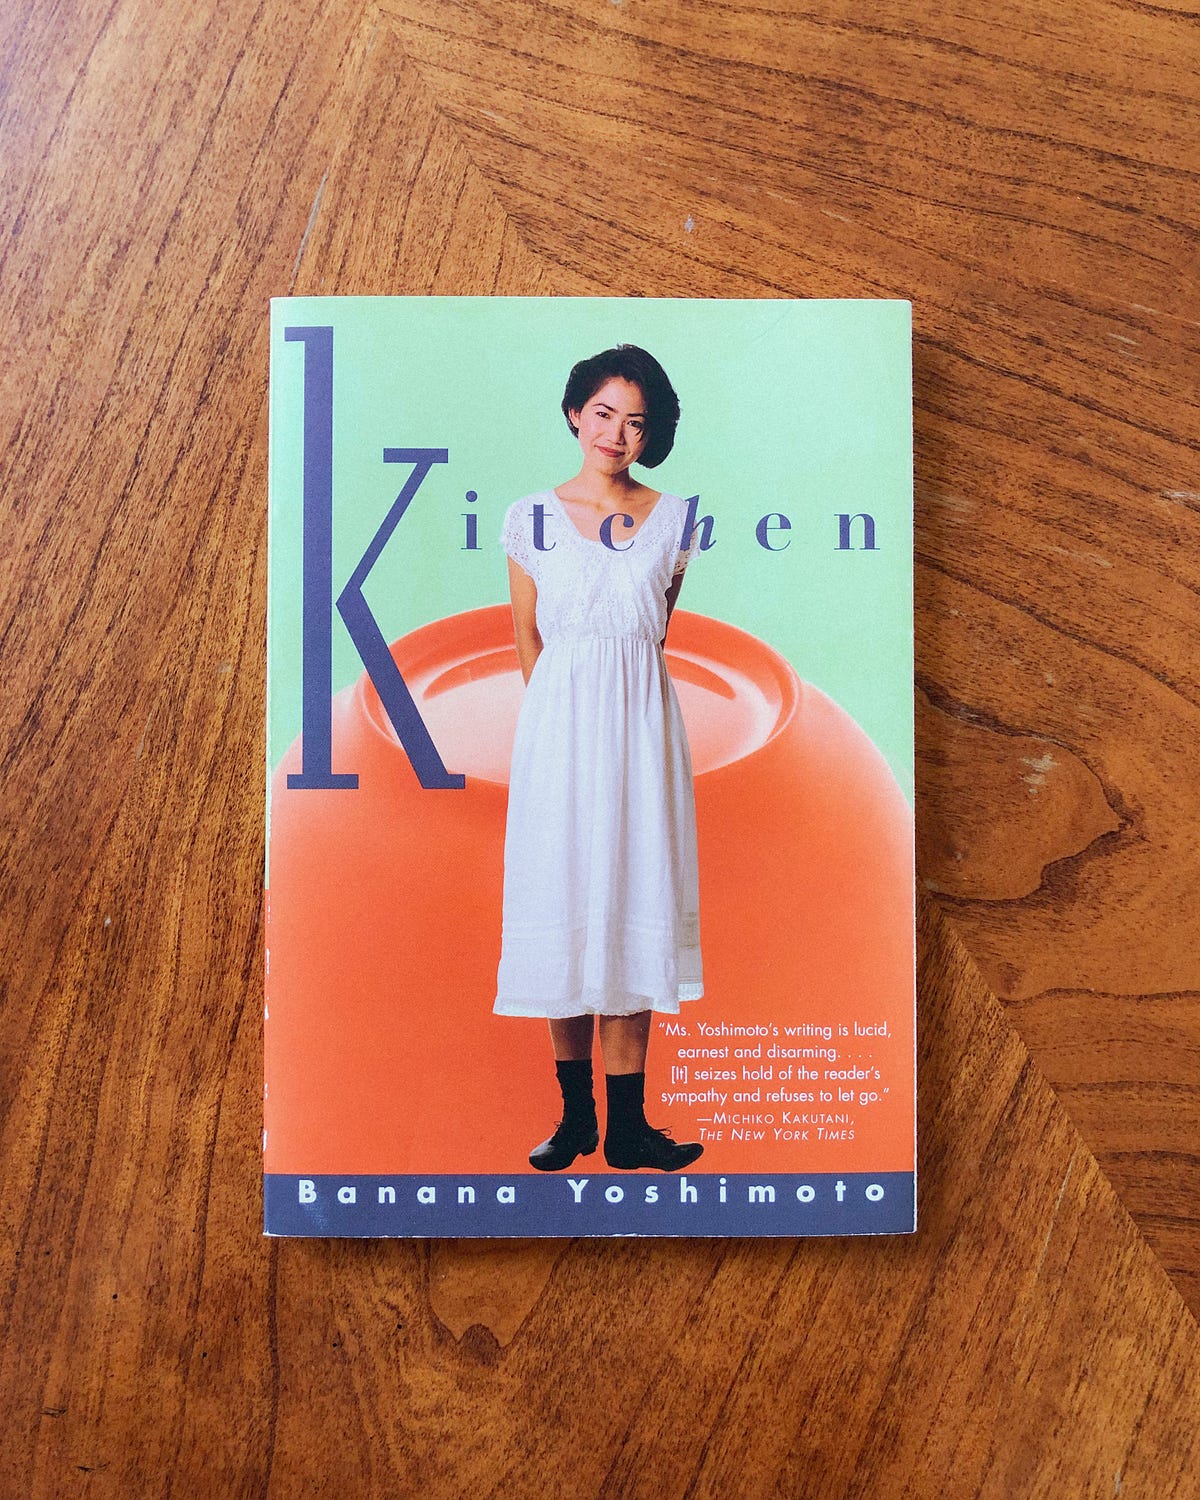 Grief With A Side of Hope: A Review of “Kitchen” by Banana Yoshimoto, by  Sarah, A Thousand Lives